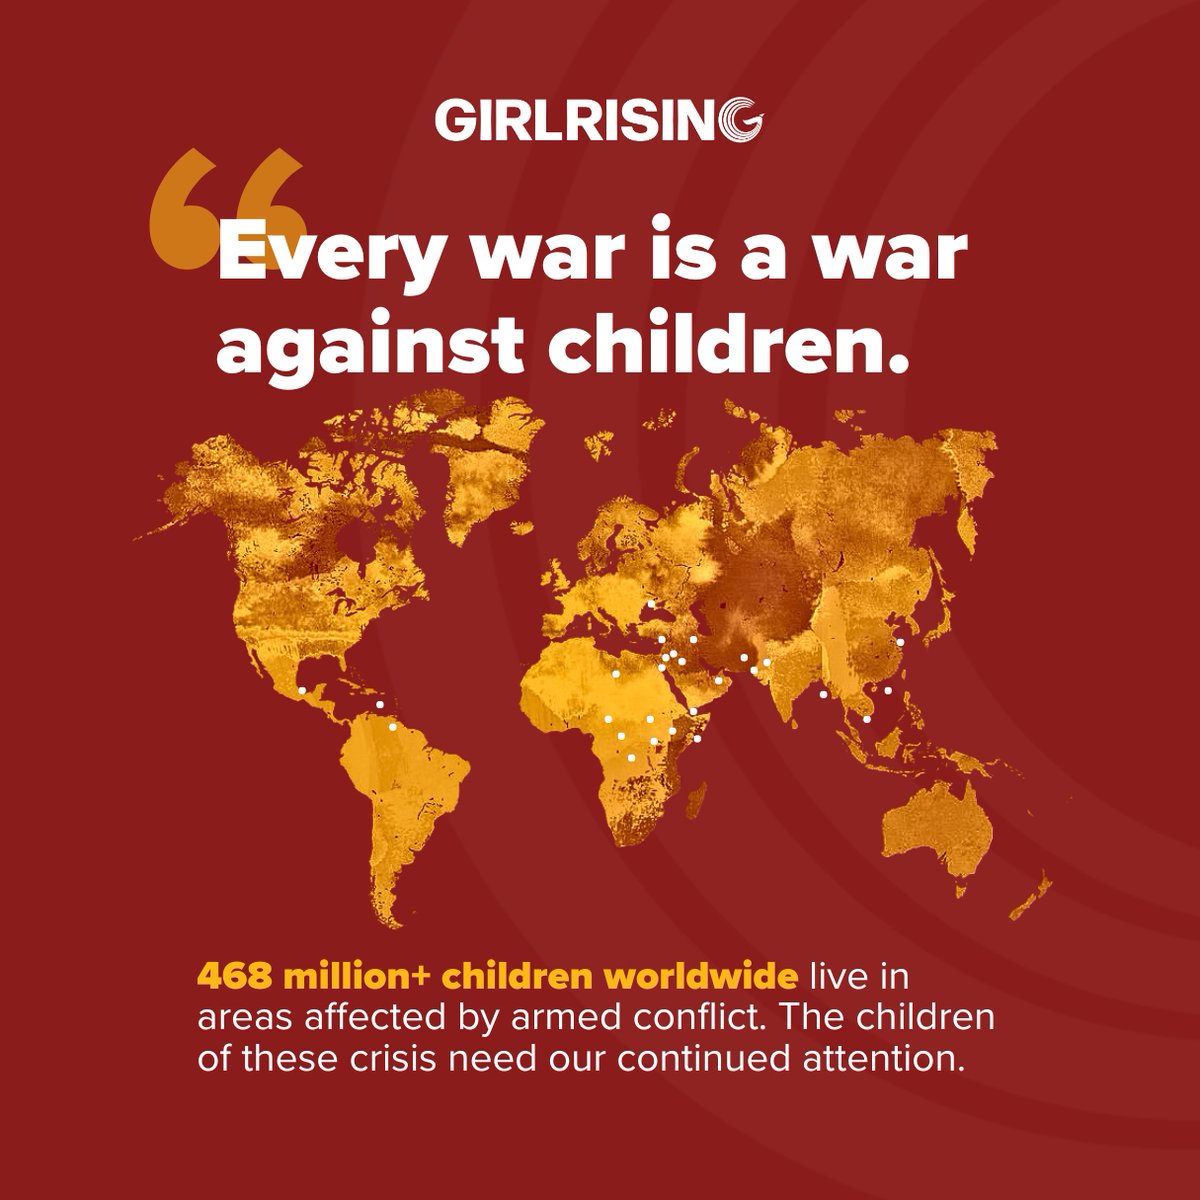 On #WorldSocialJusticeDay, we stand in solidarity with the estimated 498 million #children living in regions plagued with violent #conflict. We join in demanding their protection, inclusion of the perspectives & stories in processes working toward peace. bit.ly/4bY0wYL